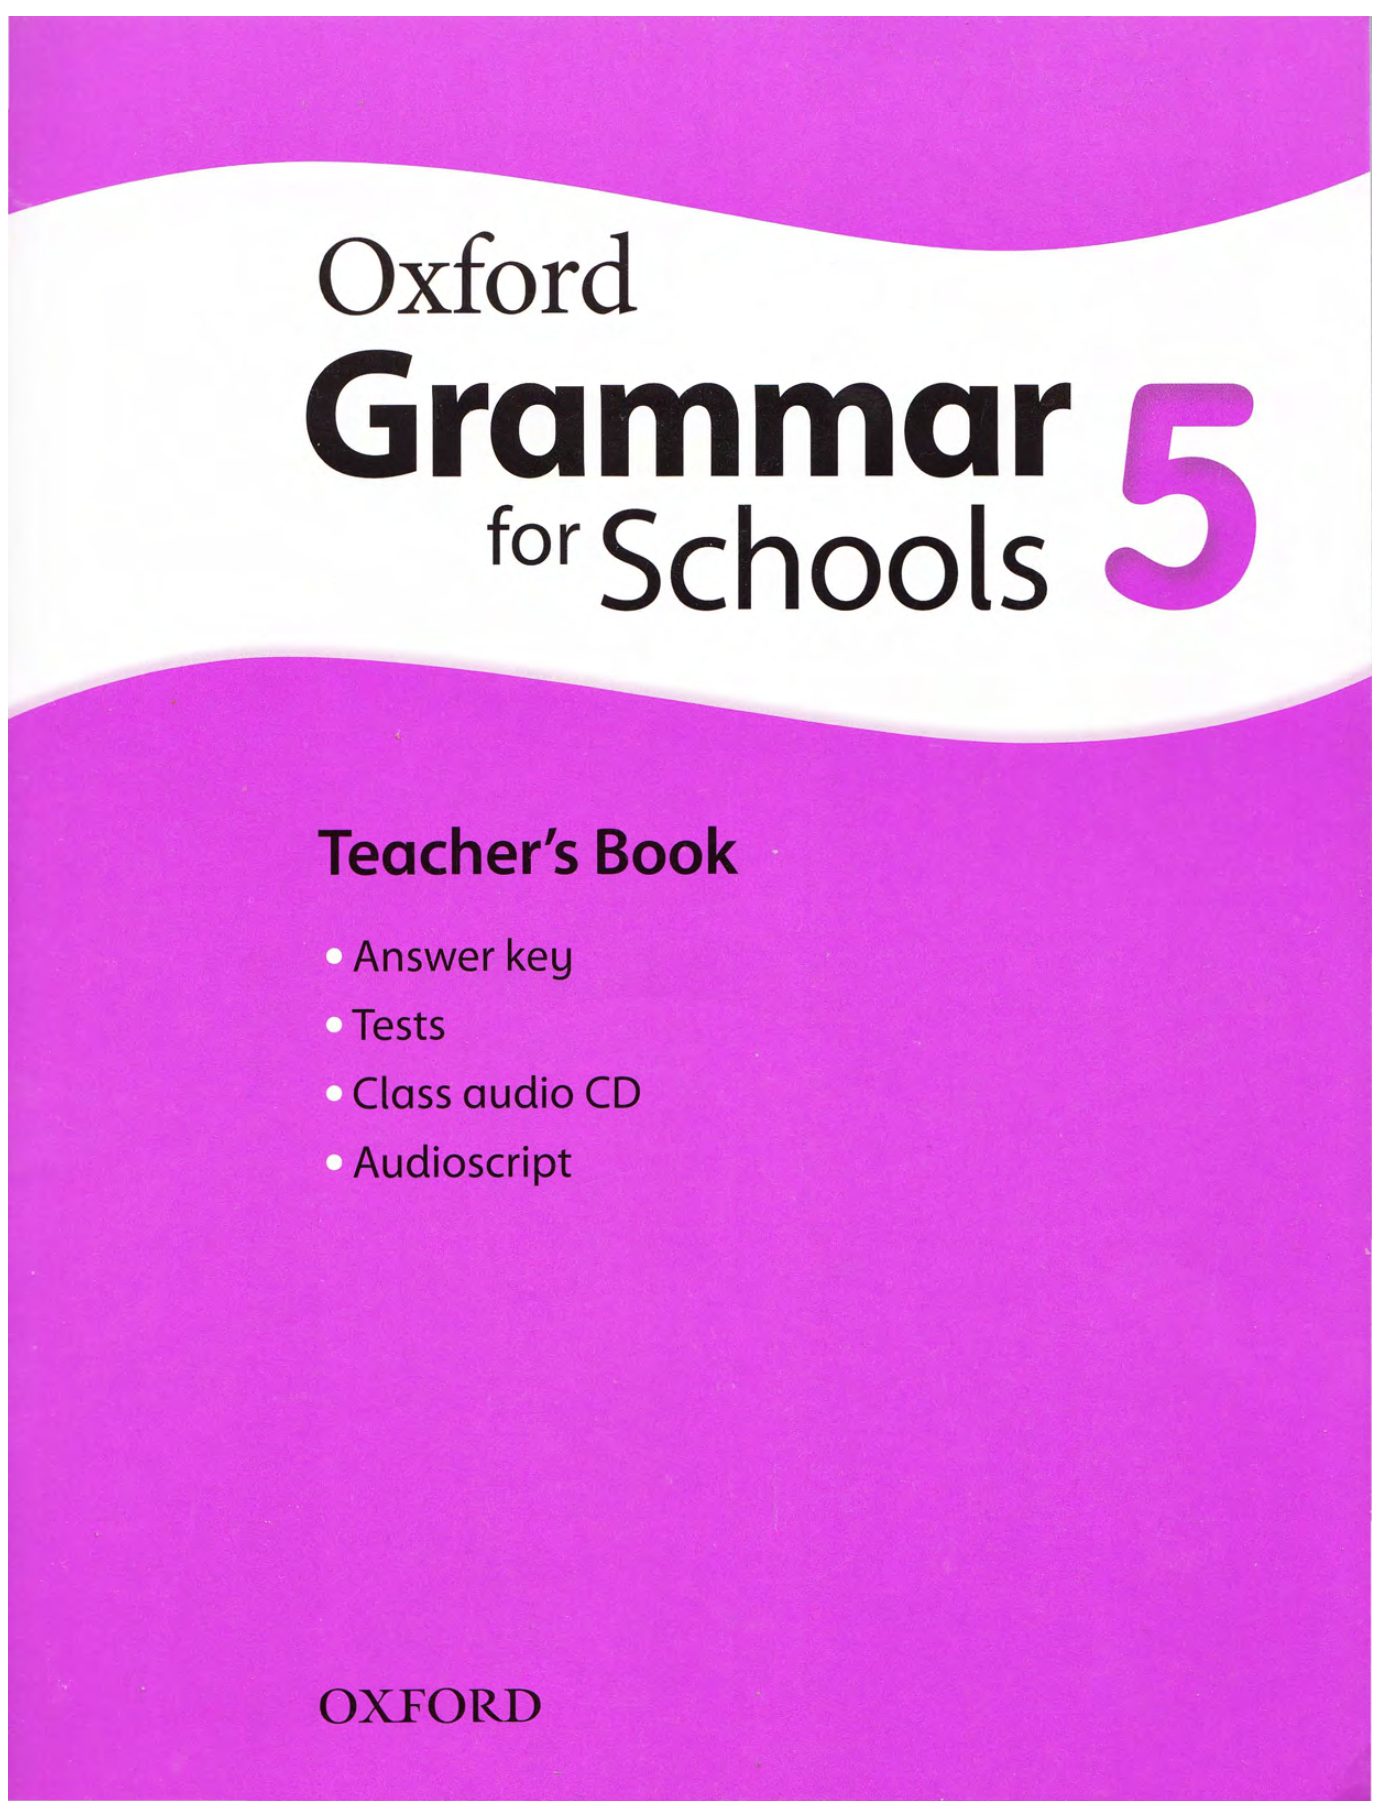 Rich Results on Google's SERP when searching for 'Oxford Grammar for Schools Teachers Book 5'